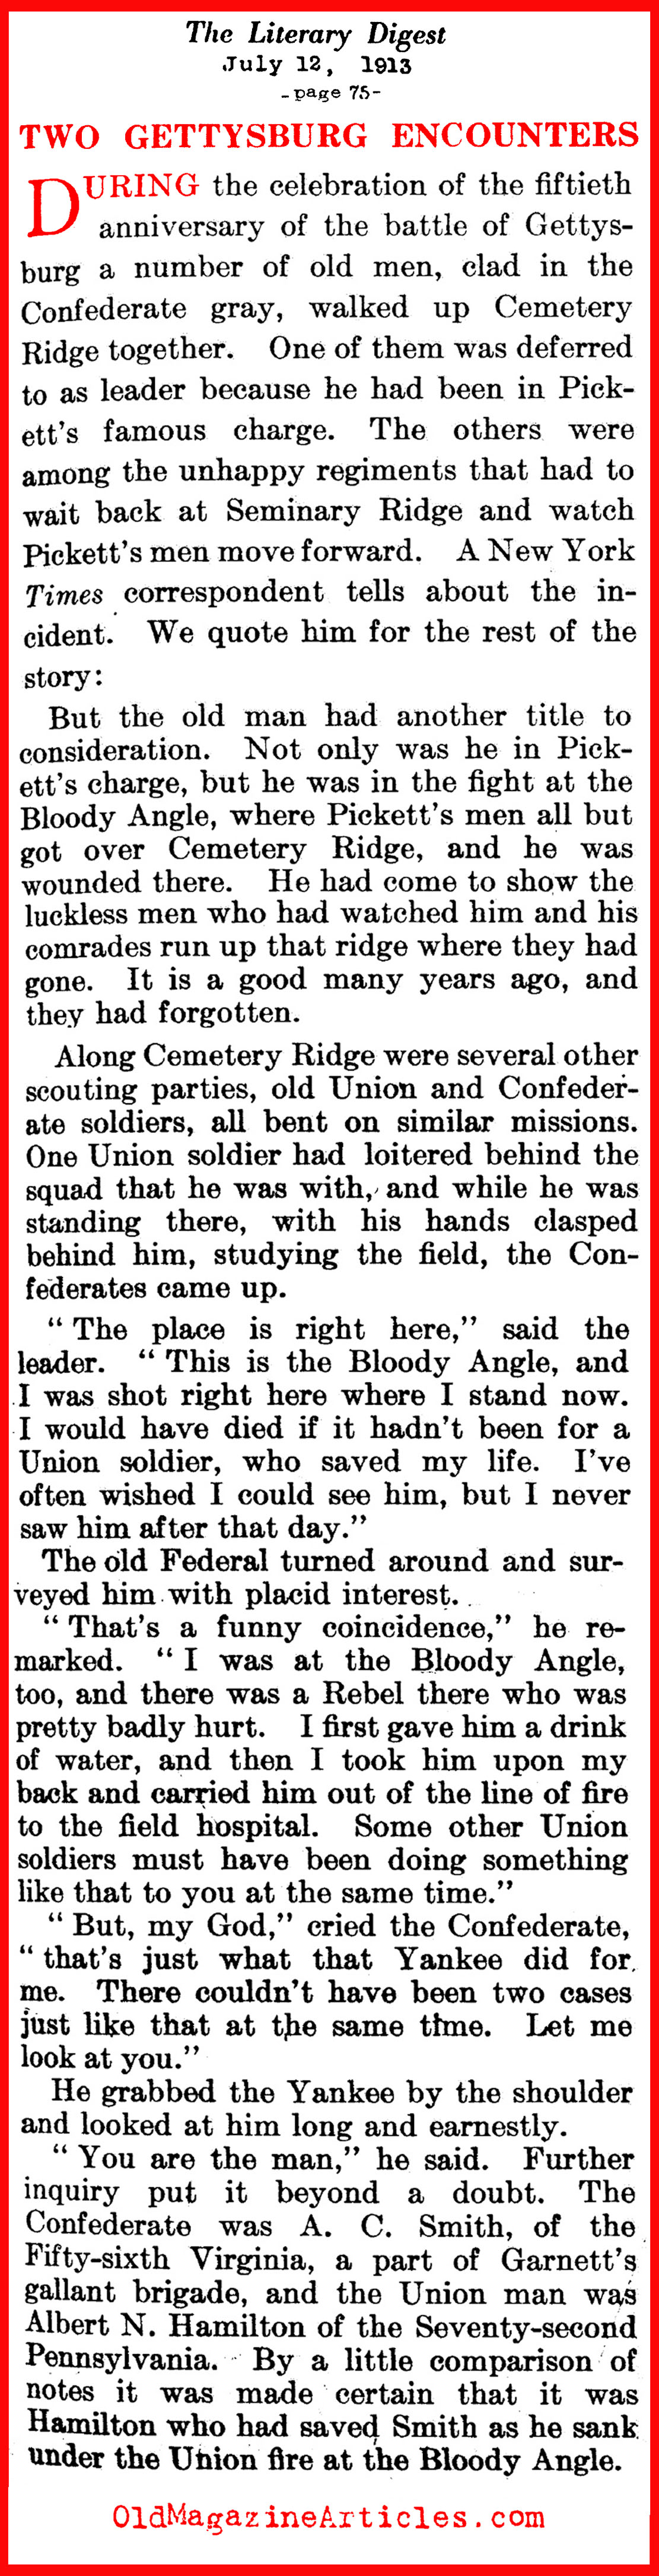 Reunion at Gettysburg's Bloody Angle    (Literary Digest, 1913)